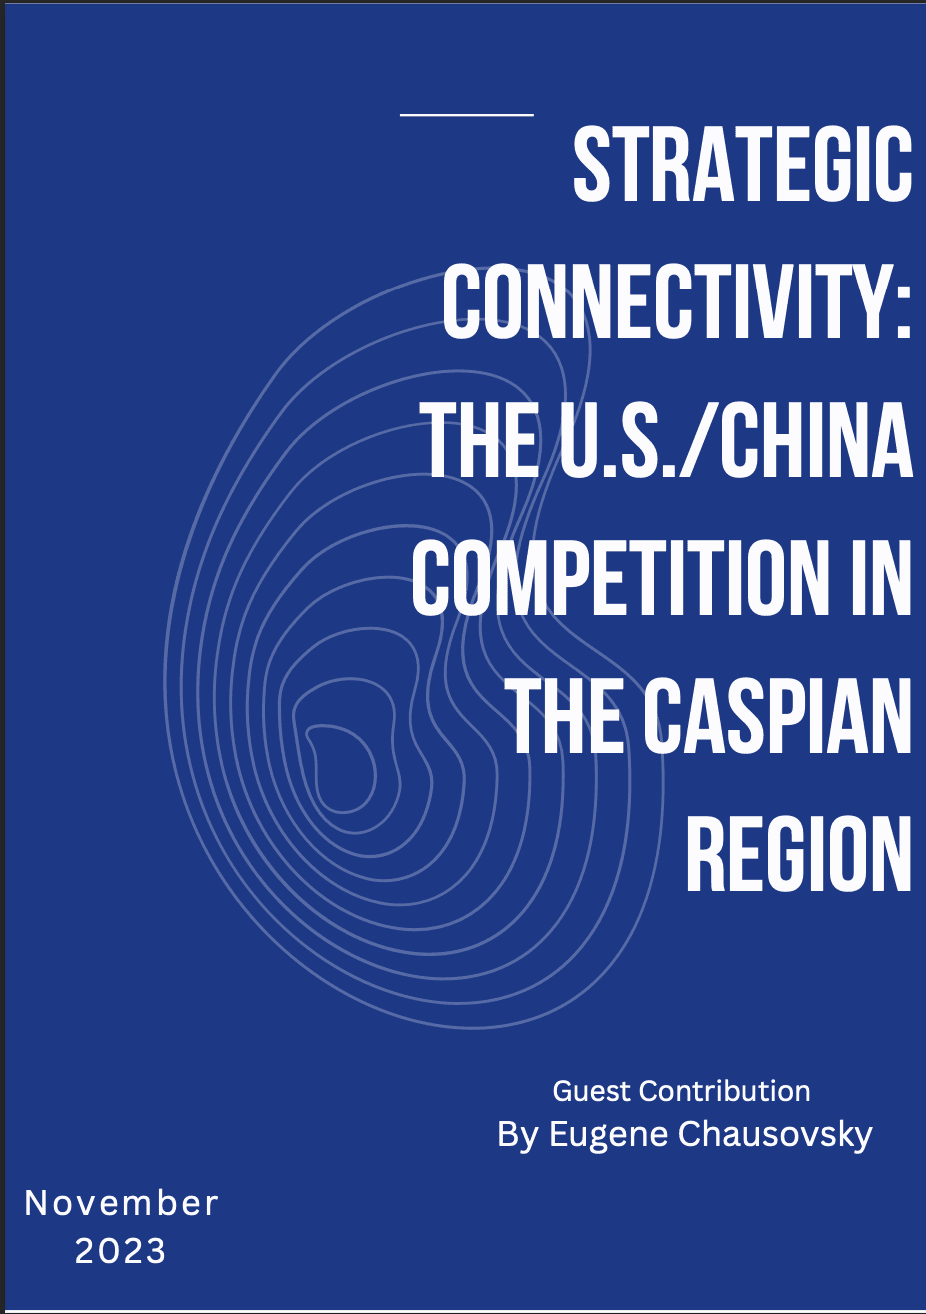 Strategic Connectivity: The U.S./China Competition in the Caspian Region